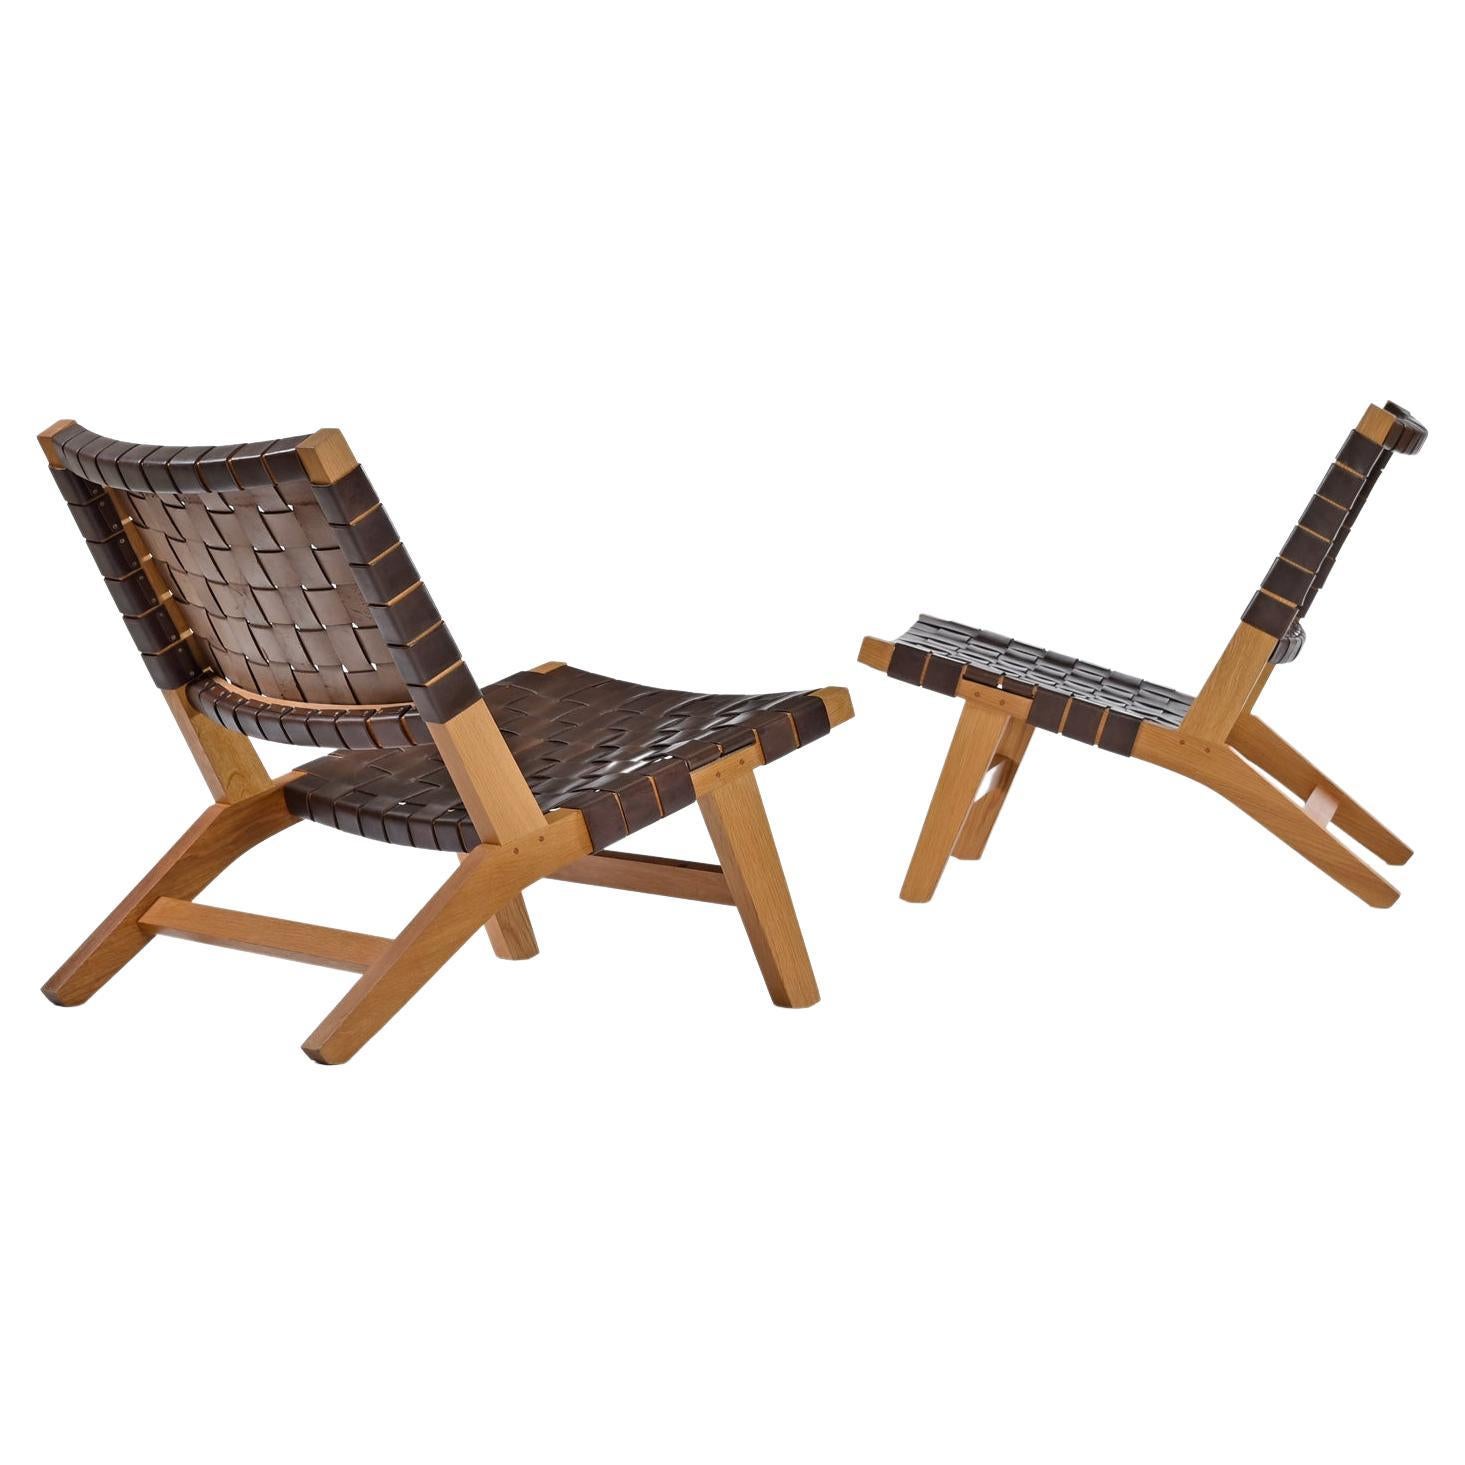 These De La Espada 128 lounge chairs are the first we've had from this maker and we're seriously impressed. Not to be outdone by the impeccable Scandinavian Modern design, the materials, fit and finish are superb. The solid, honey colored ash wood